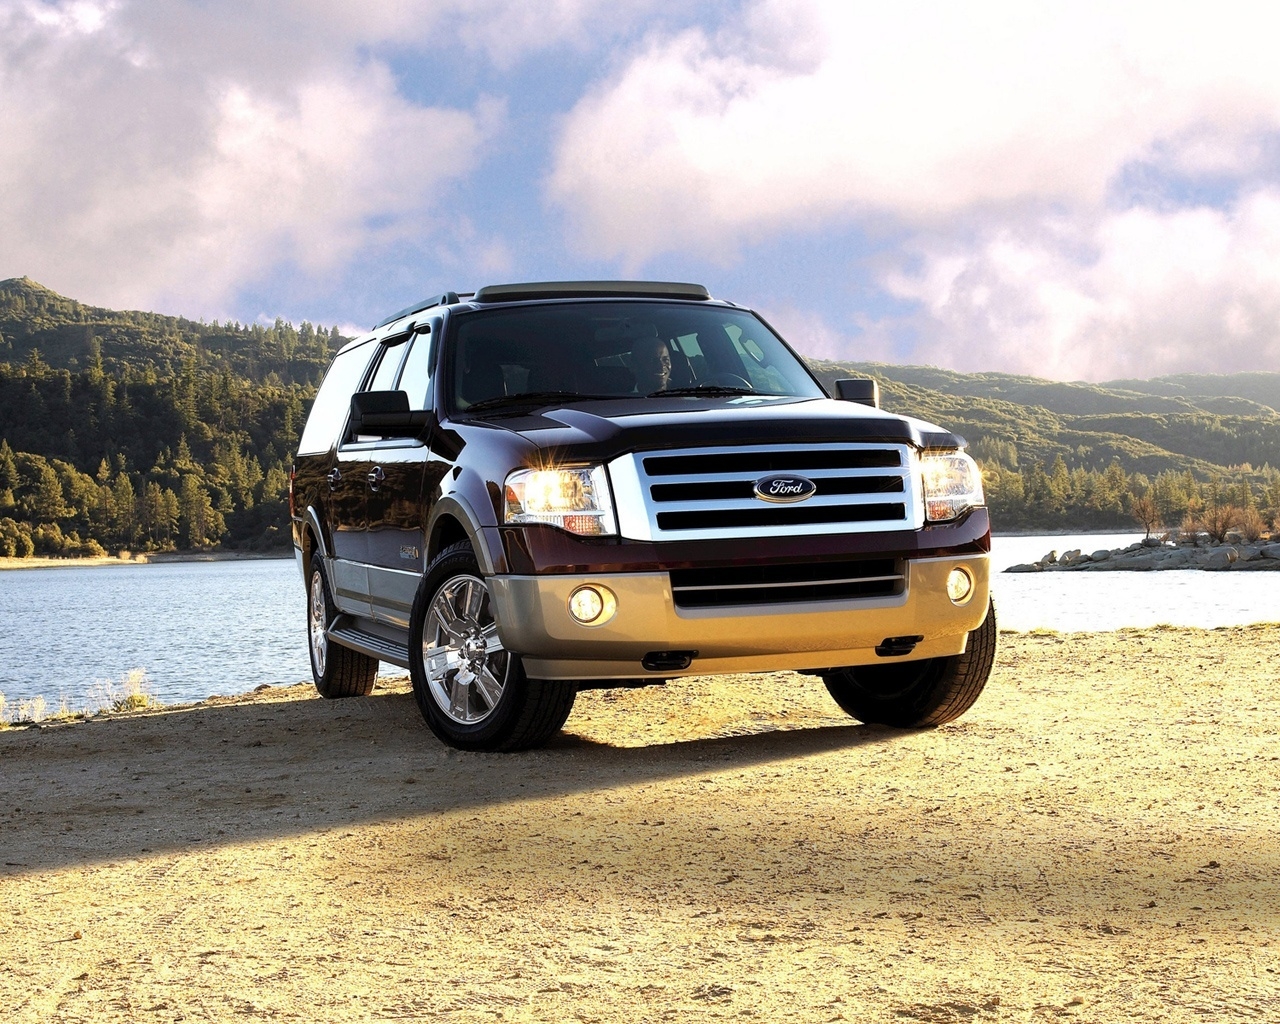 Ford Expedition 2010 for 1280 x 1024 resolution